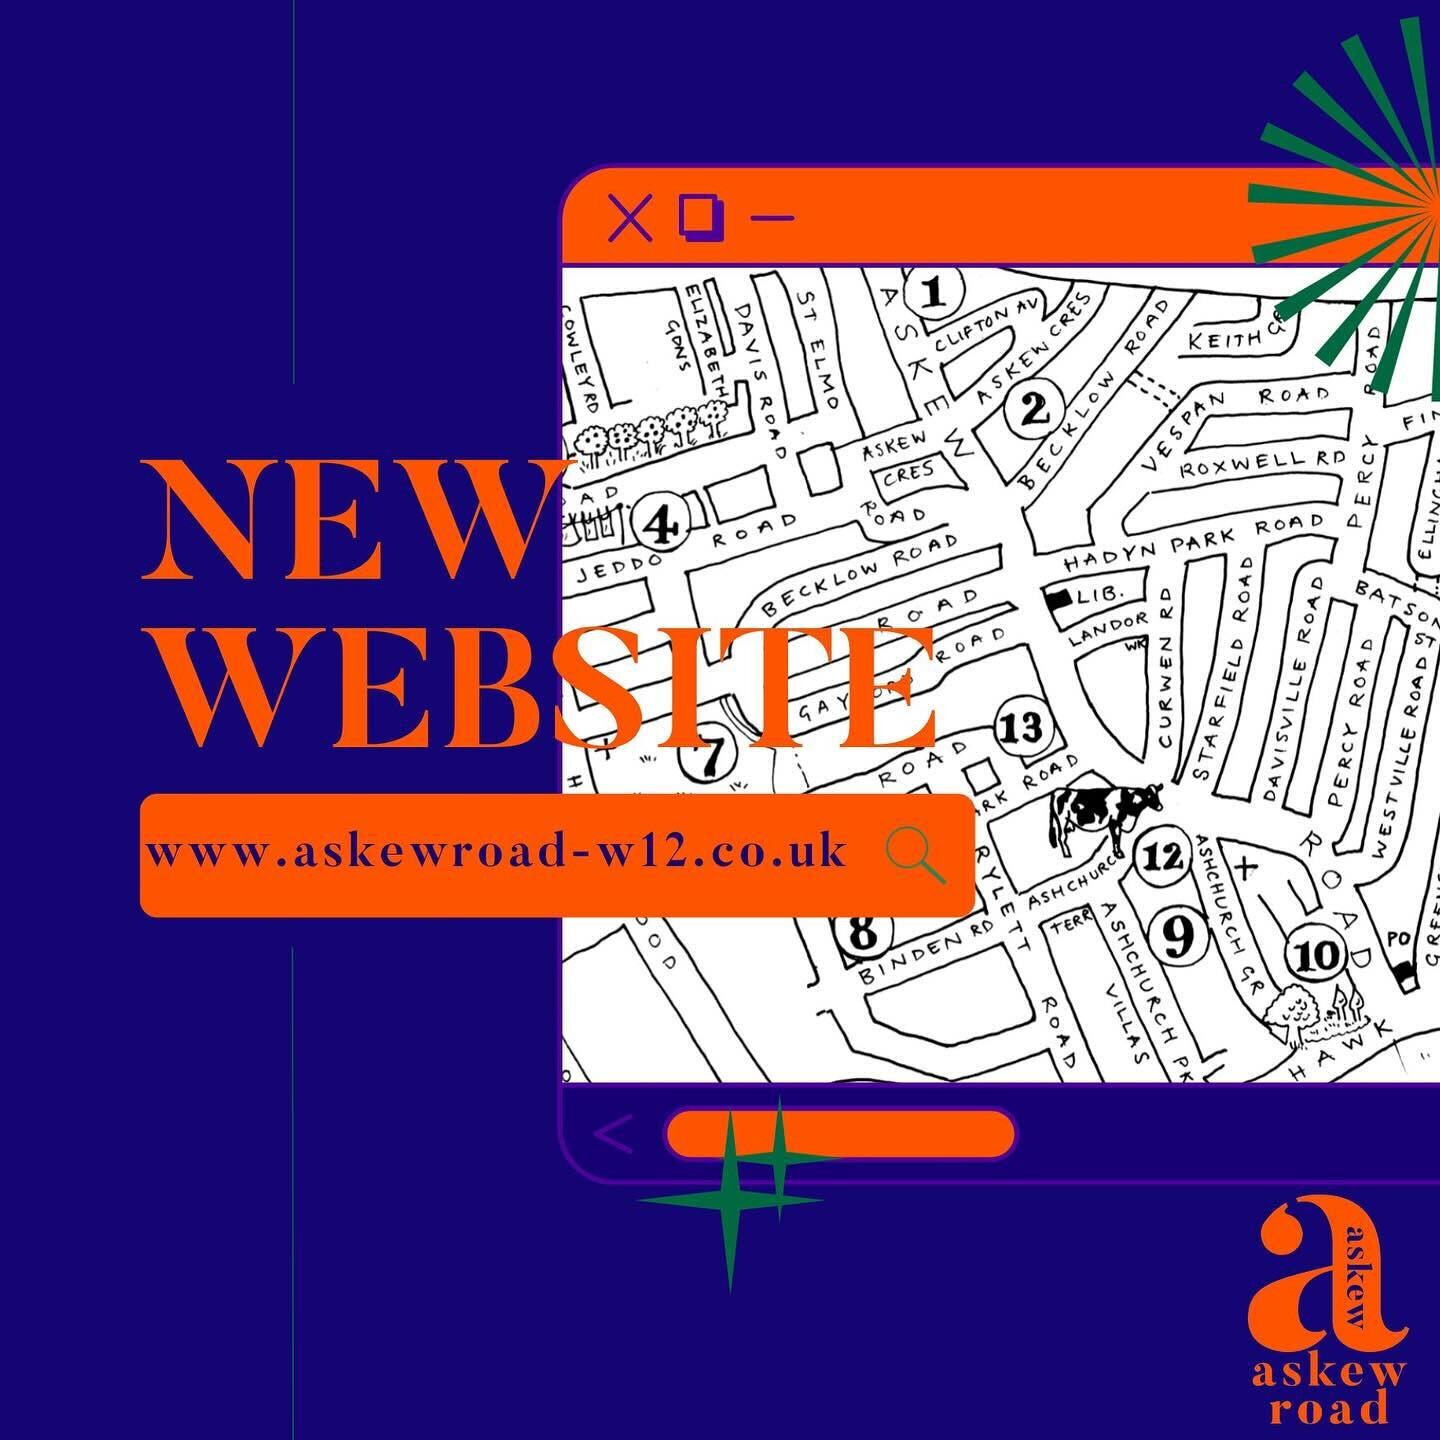 Head to www.askewroad-w12.co.uk to learn more about how we&rsquo;re helping to make the most of our high street, Askew Road Business Association, the Askew Magazine, local history and important information about news and events

The link is in our bi